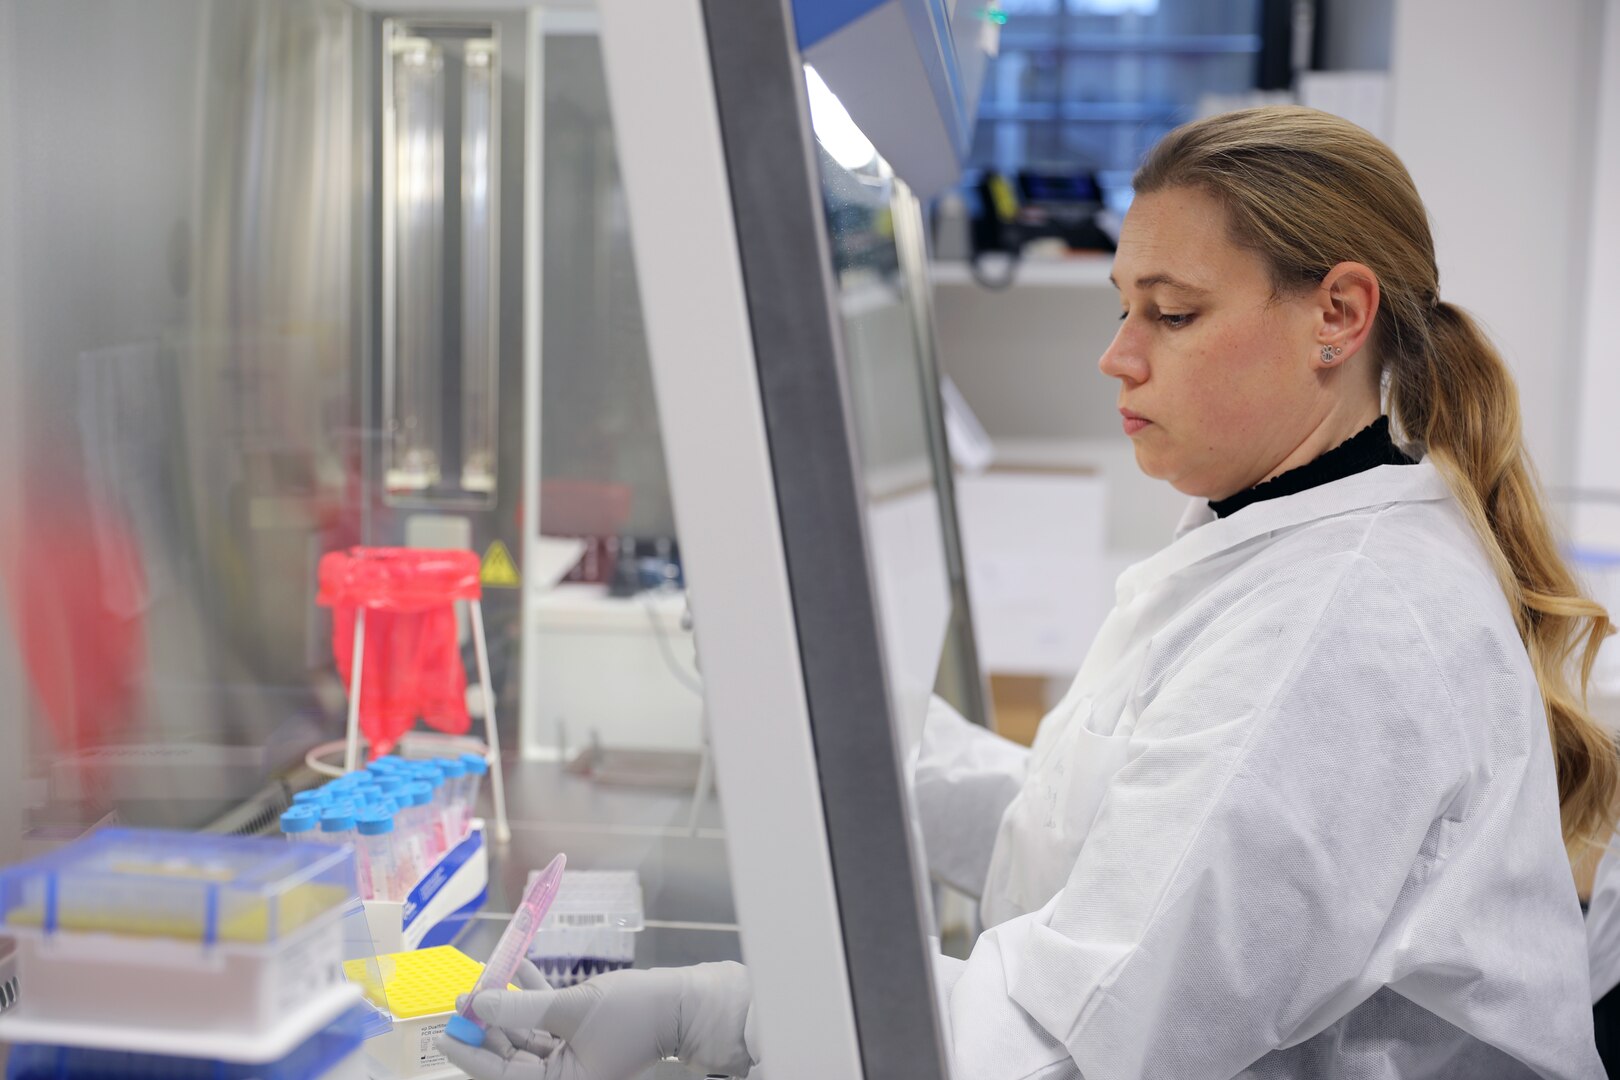 Nina Gruhn, a senior microbiologist in the Biological Analysis Division at Public Health Command Europe, demonstrates the COVID-19 surveillance testing process.